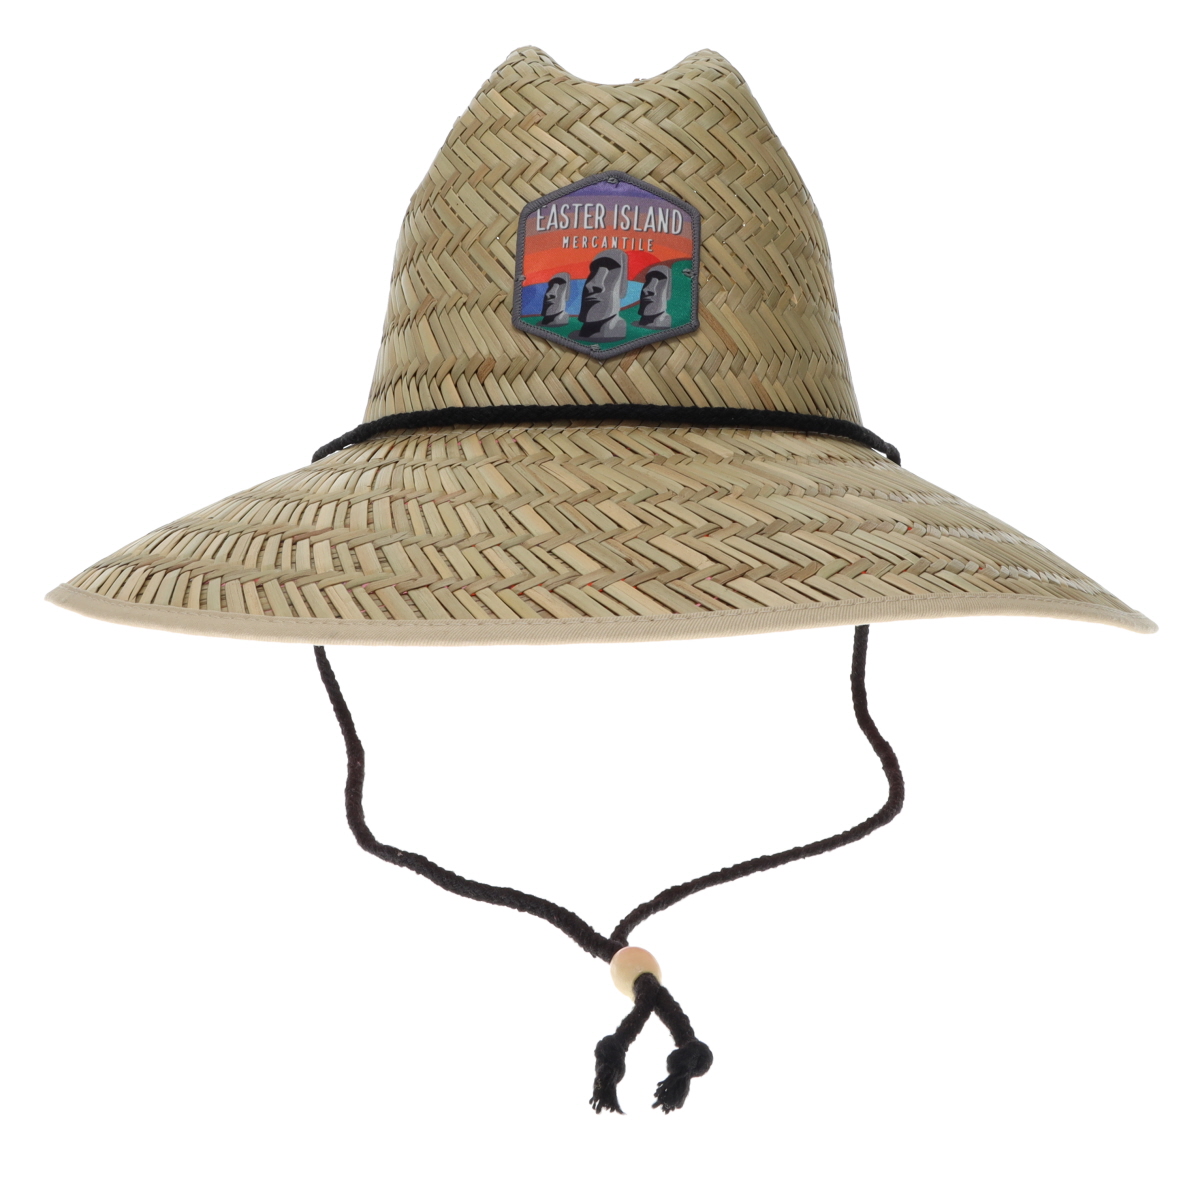 Easter Island Mercantile HBS4BUR Straw Patch Hat with Burgundy Floral Brim Straw Sun Hat for Men and Women Beach Hat Sunblock